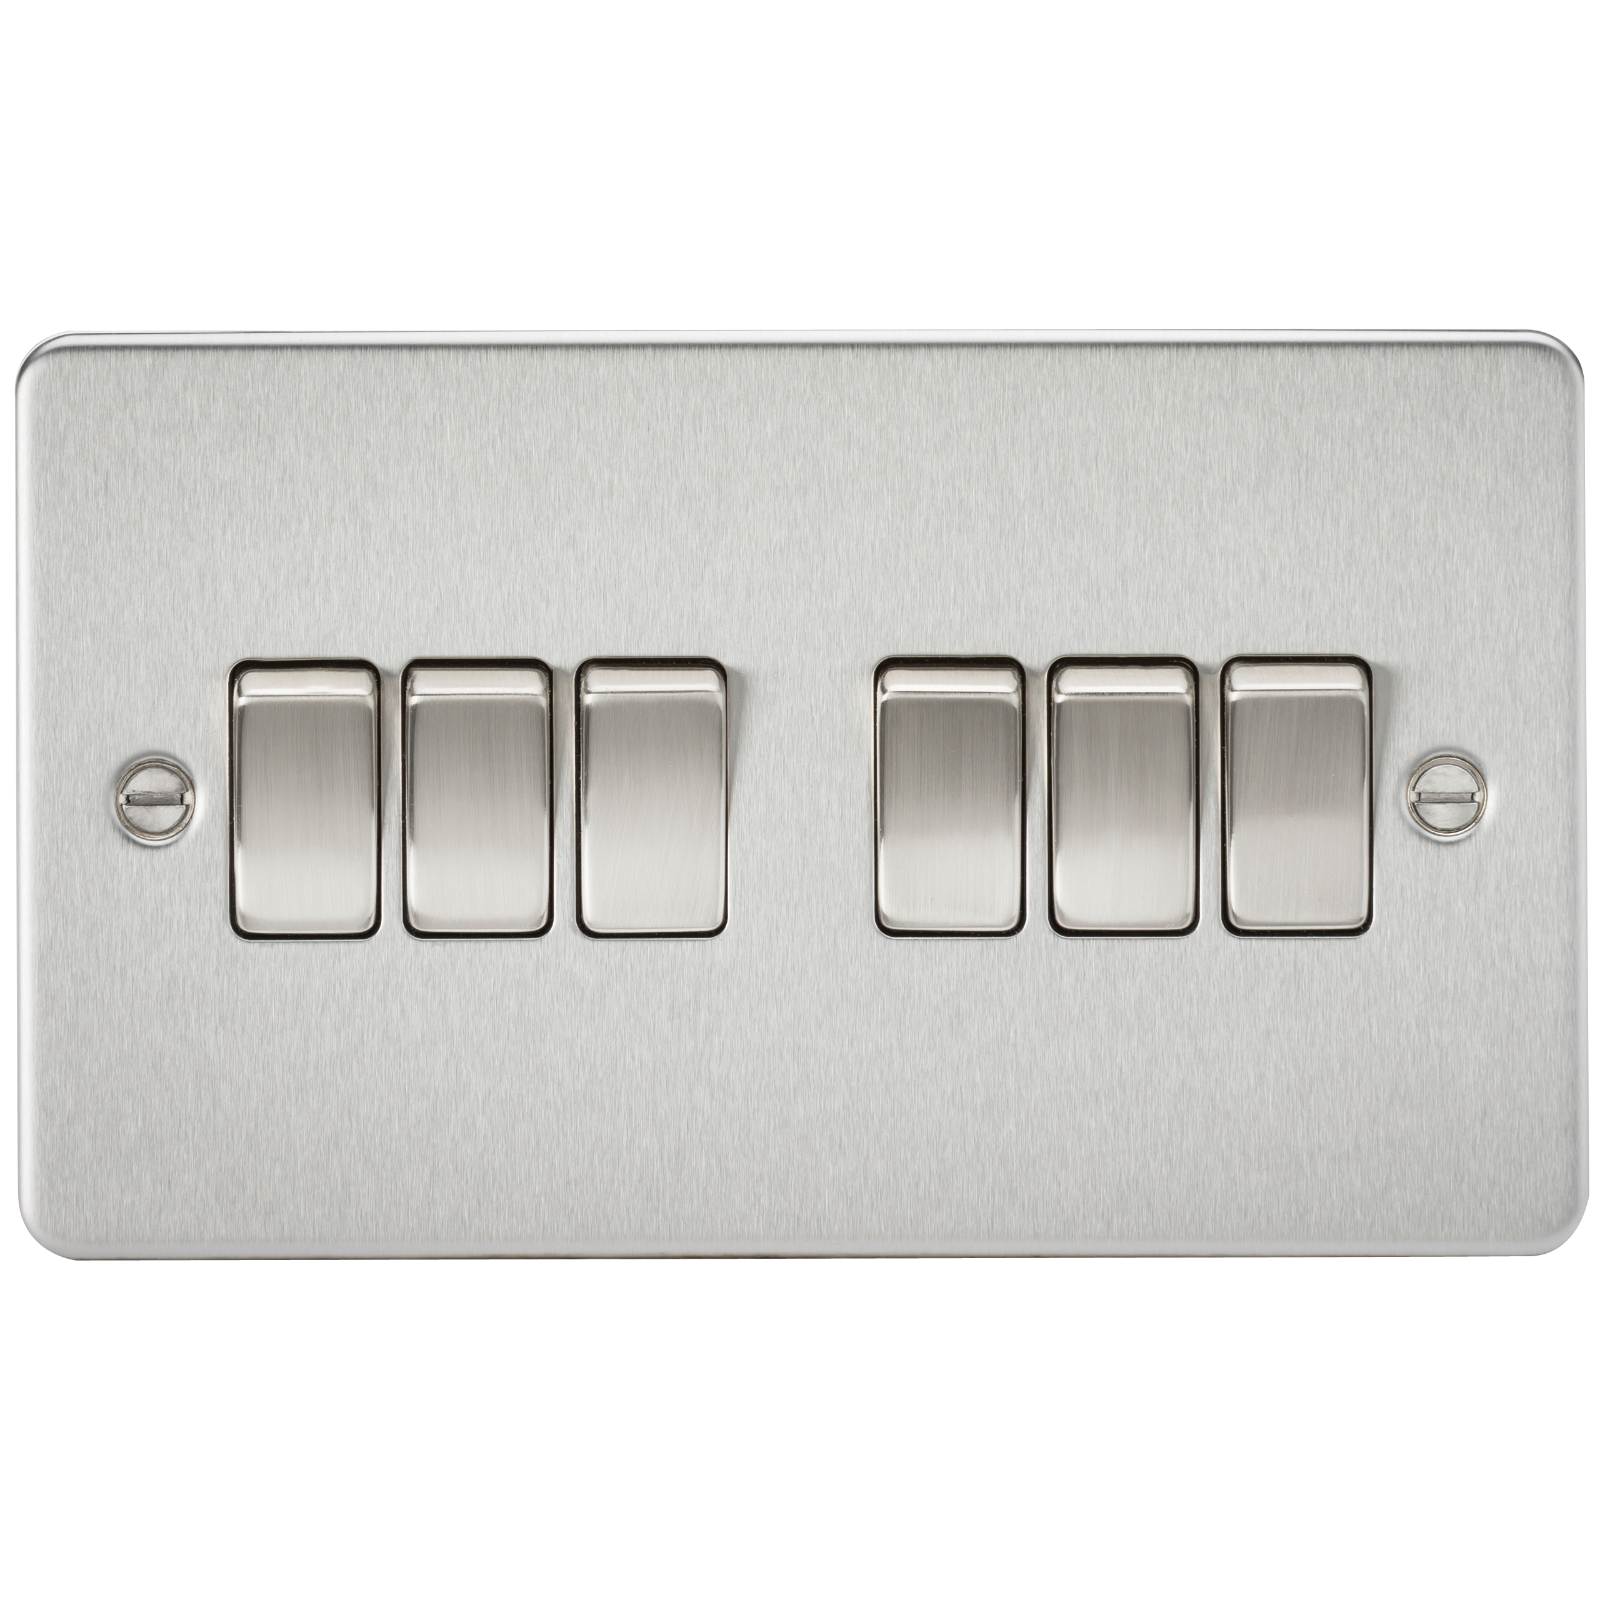 Flat Plate 10A 6G 2-way Switch - Brushed Chrome - FP4200BC 